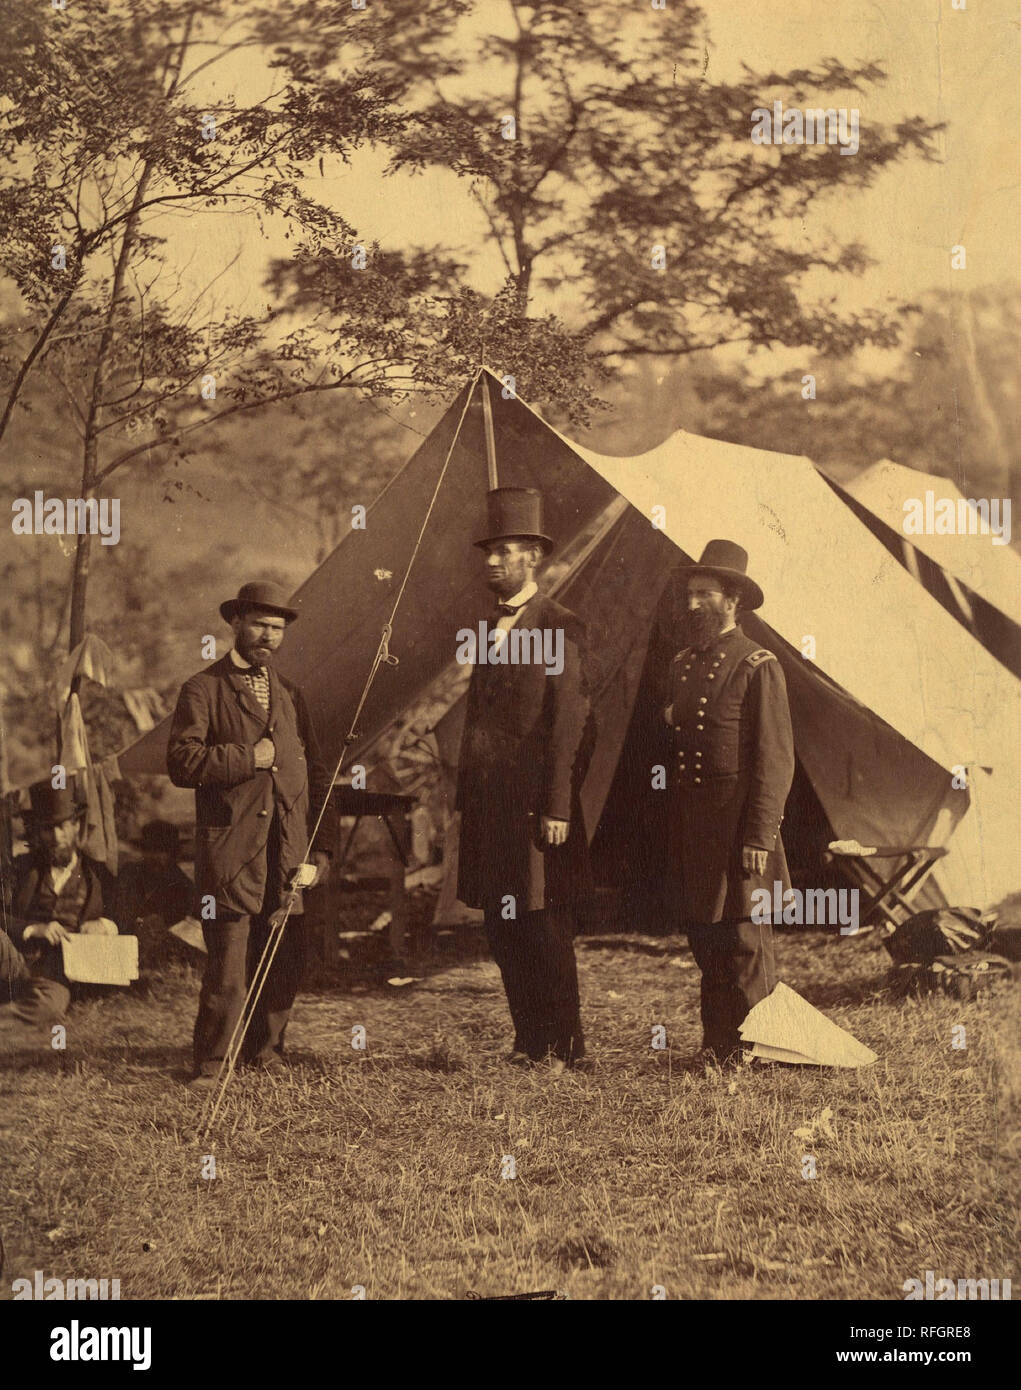 [President Abraham Lincoln, Major General John A. McClernand (right), and E. J. Allen (Allan Pinkerton, left), Chief of the Secret Service of the United States, at Secret Service Department, Headquarters Army of the Potomac, near  Antietam, Maryland]. Artist: Alexander Gardner (American, Glasgow, Scotland 1821-1882 Washington, D.C.). Dimensions: Image: 22.4 x 18 cm (8 13/16 x 7 1/16 in.)  Mount: 29.2 x 20.7 cm (11 1/2 x 8 1/8 in.). Person in Photograph: Abraham Lincoln (American, Hardin County, Kentucky 1809-1865 Washington, D.C.); John Alexander McClernand (American, Breckinridge County, Kent Stock Photo